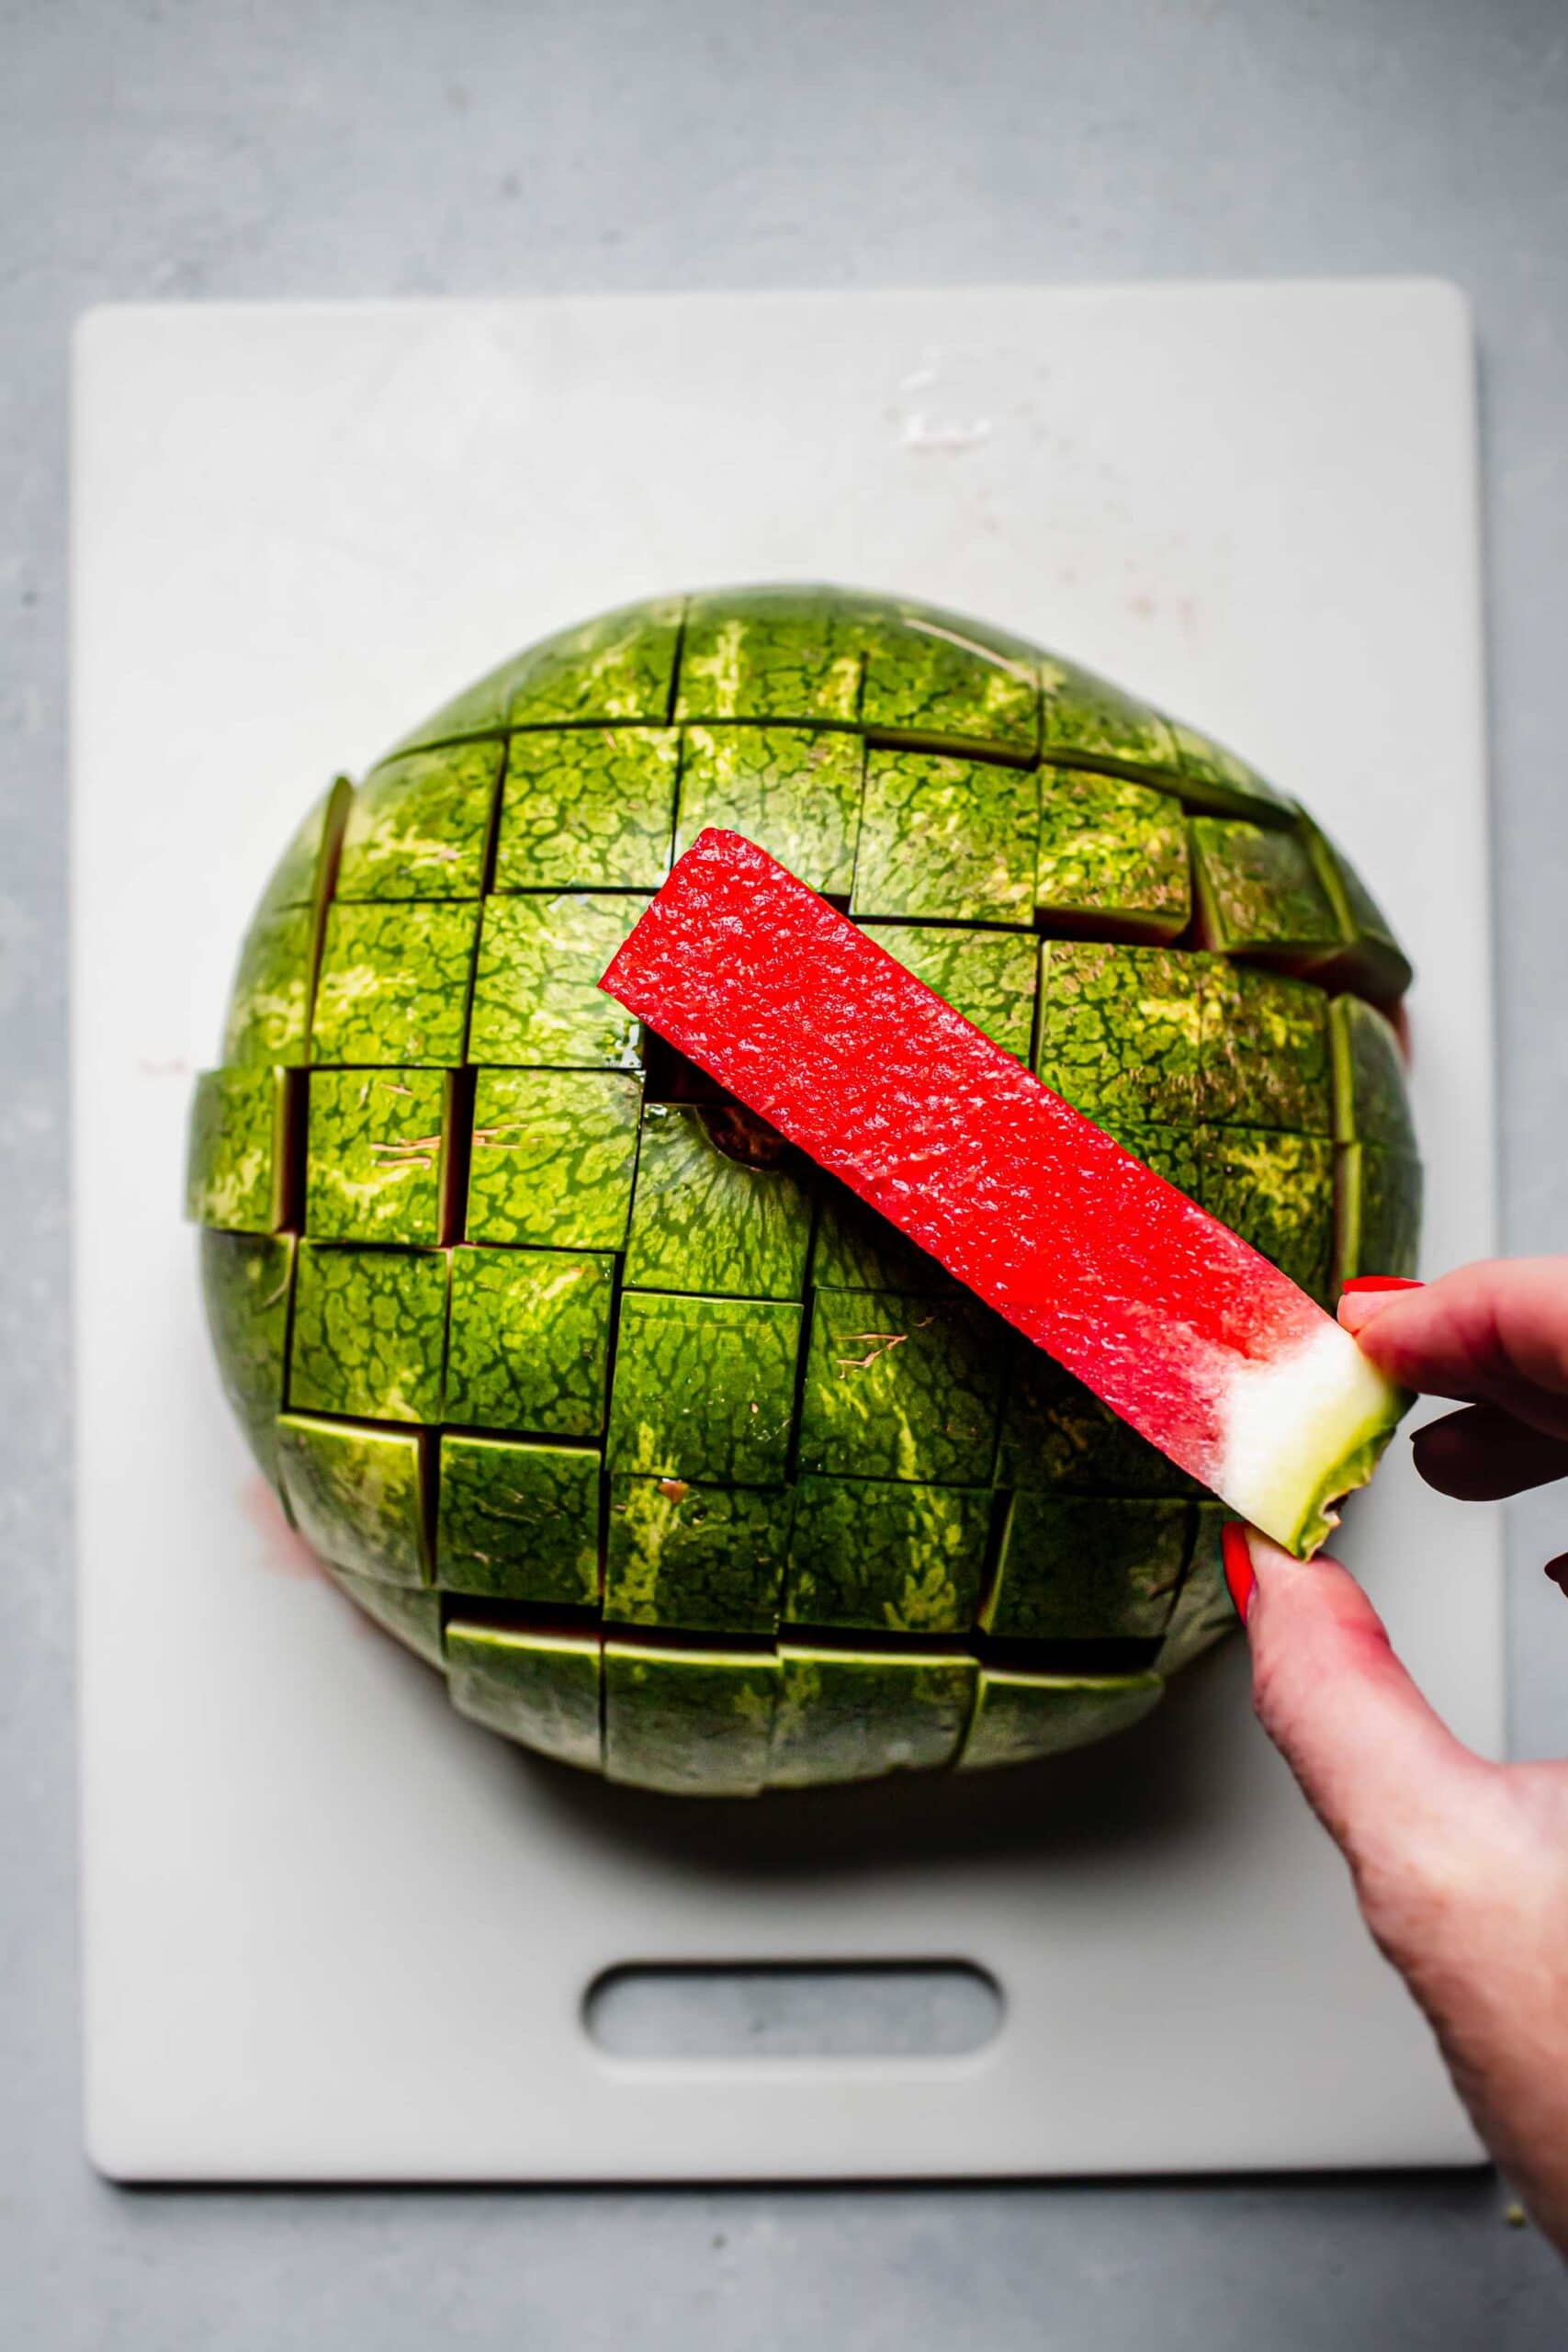 Hand holding stick of watermelon next to cut up melon.